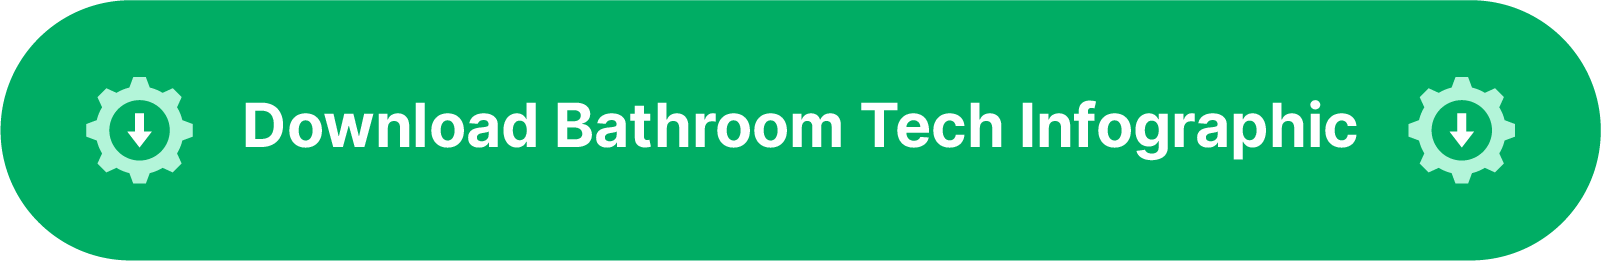 Green button that reads "Download Bathroom Tech Infographic"